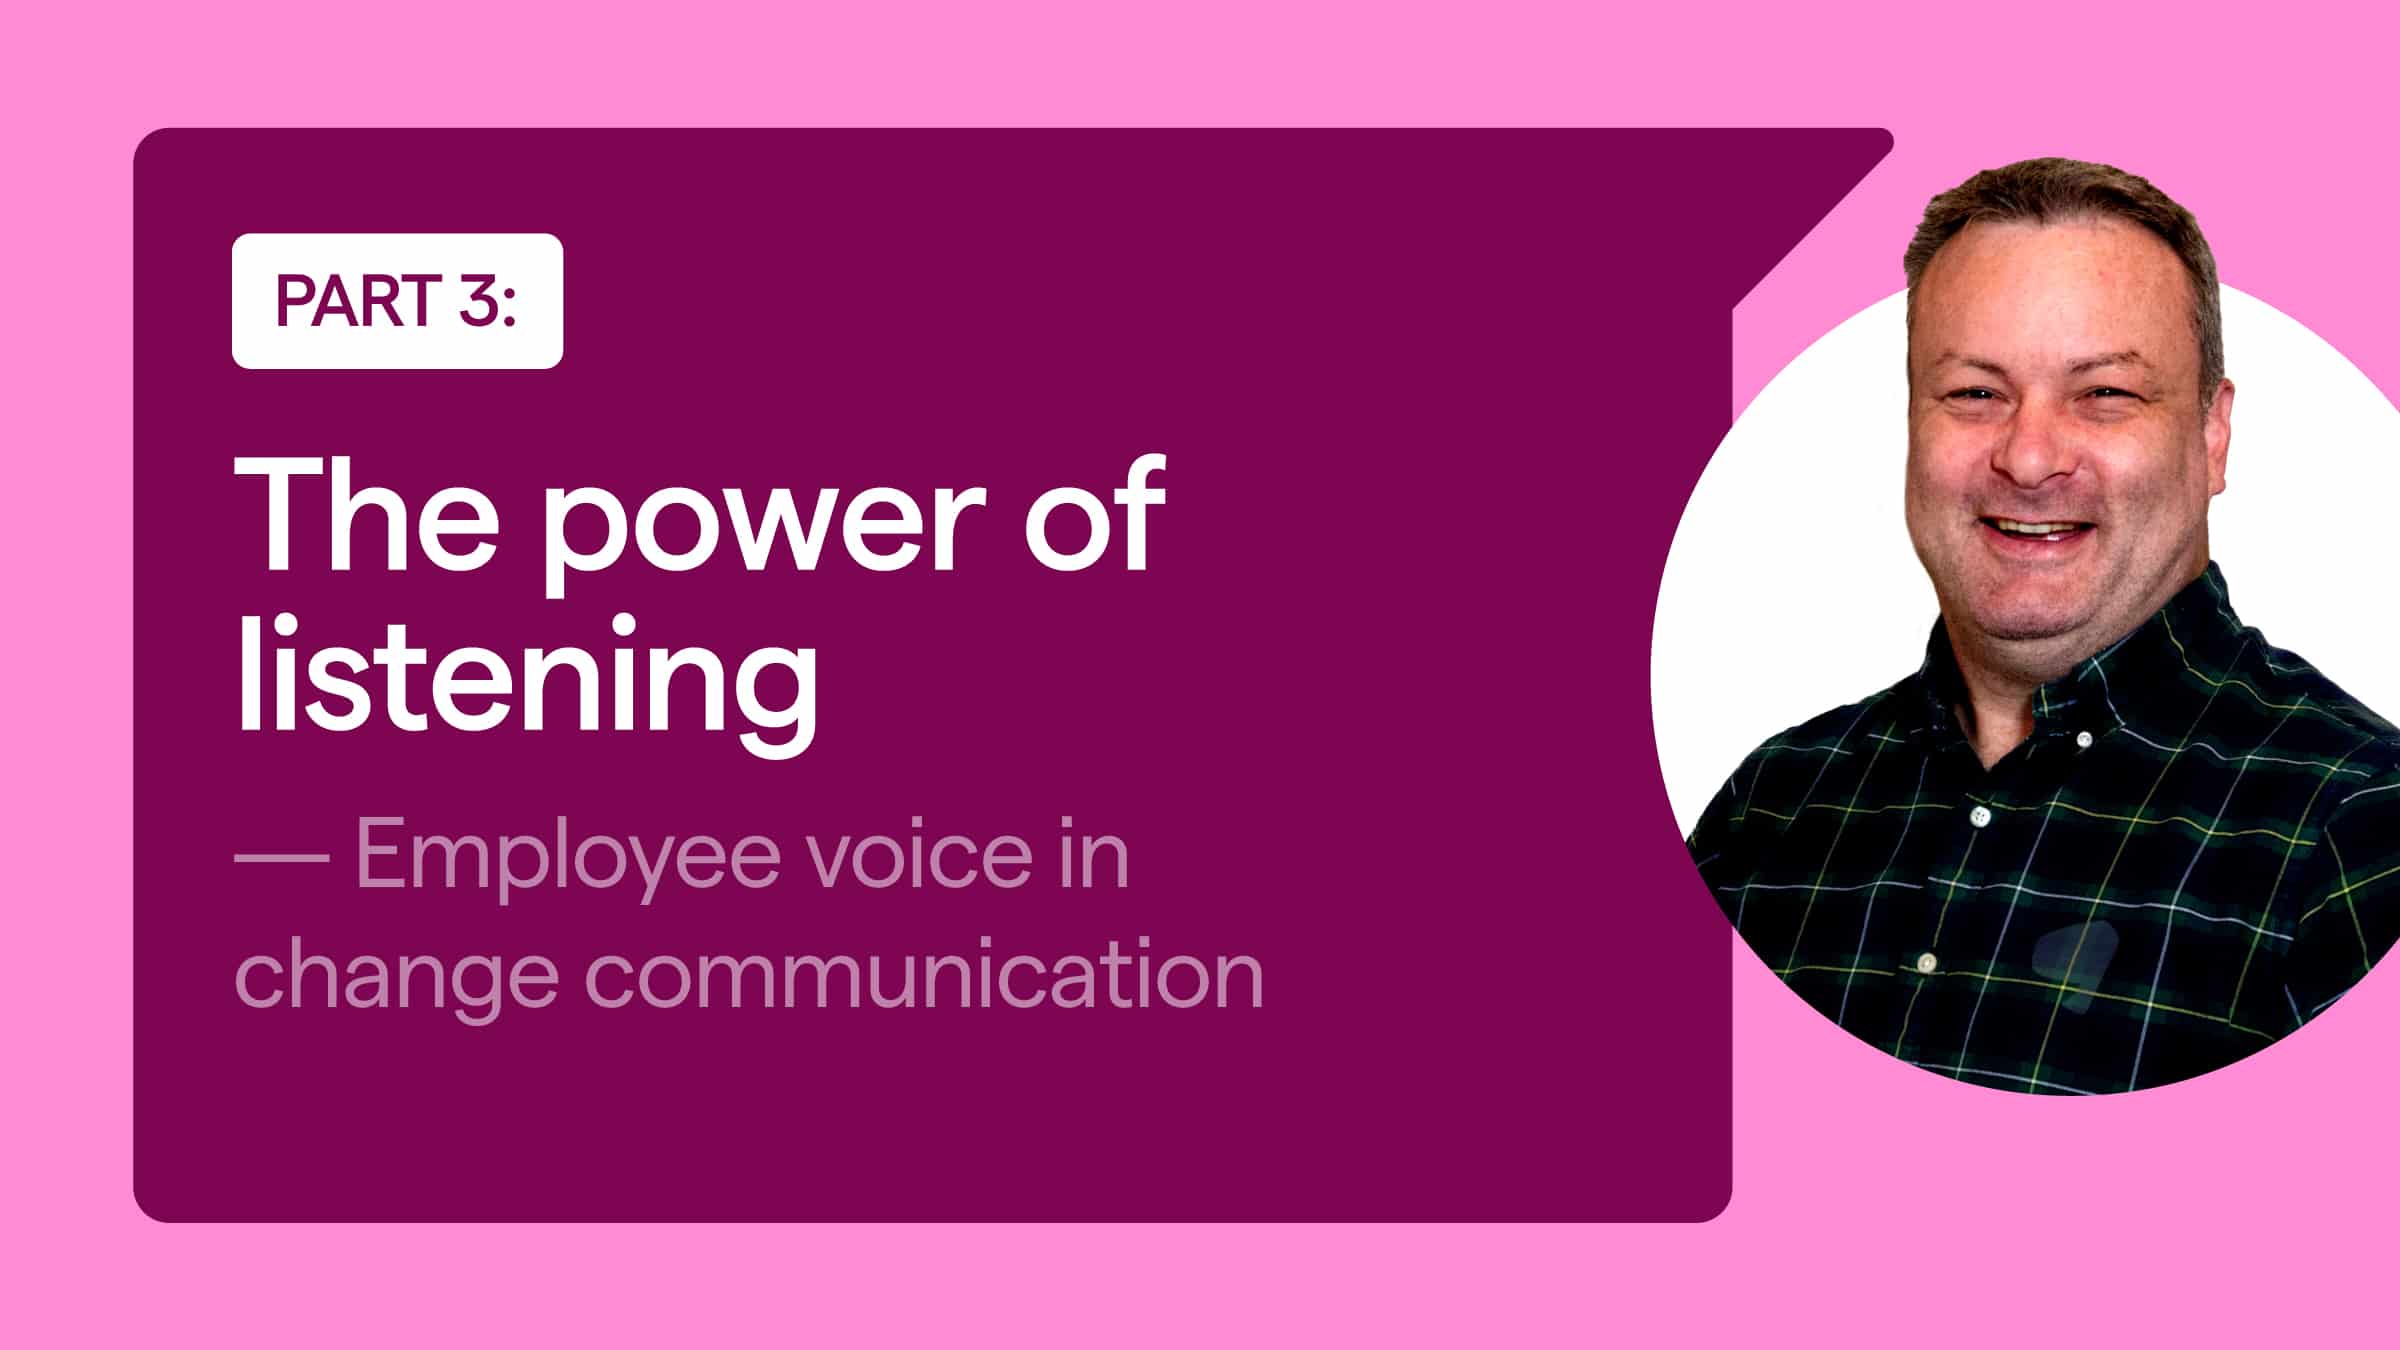 The importance of employee voice in change communication